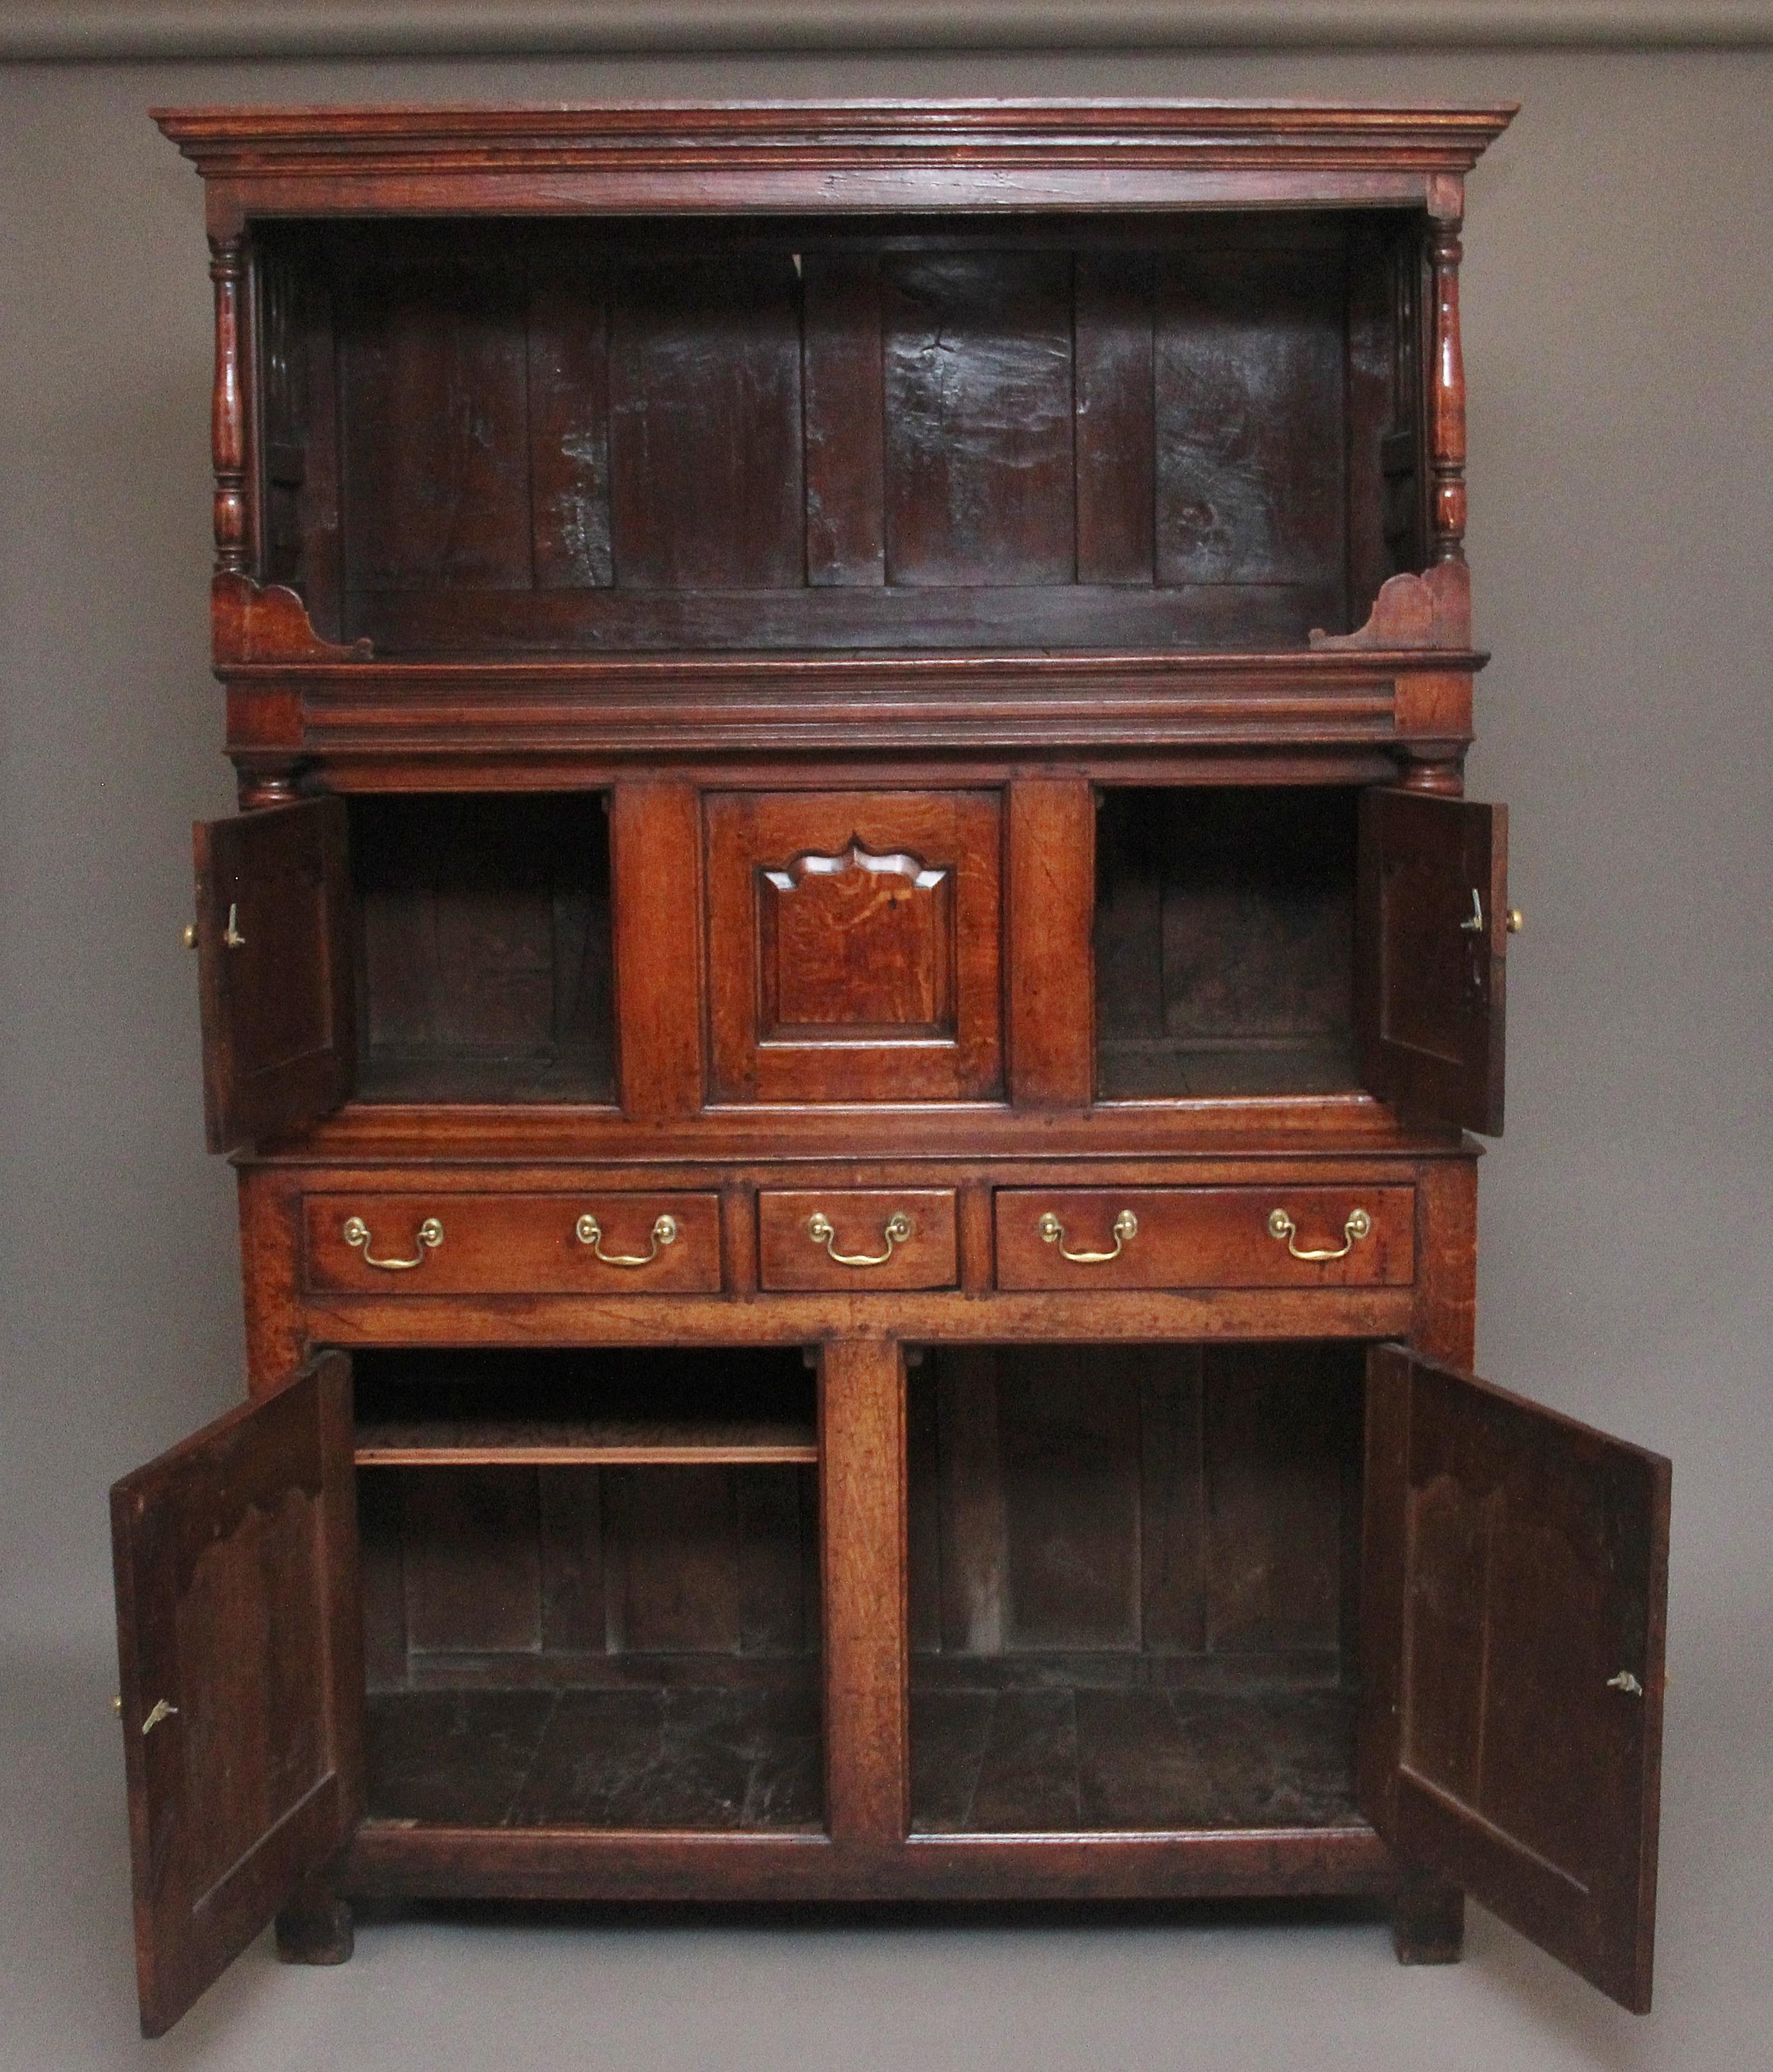 An exceptional antique Mid-18th Century cwpwrdd tridarn (court cupboard) The tridarn consists of an open section to the top for the display of their copper, brass and pewter, the middle section has two fielded doors and a fielded panel in the centre